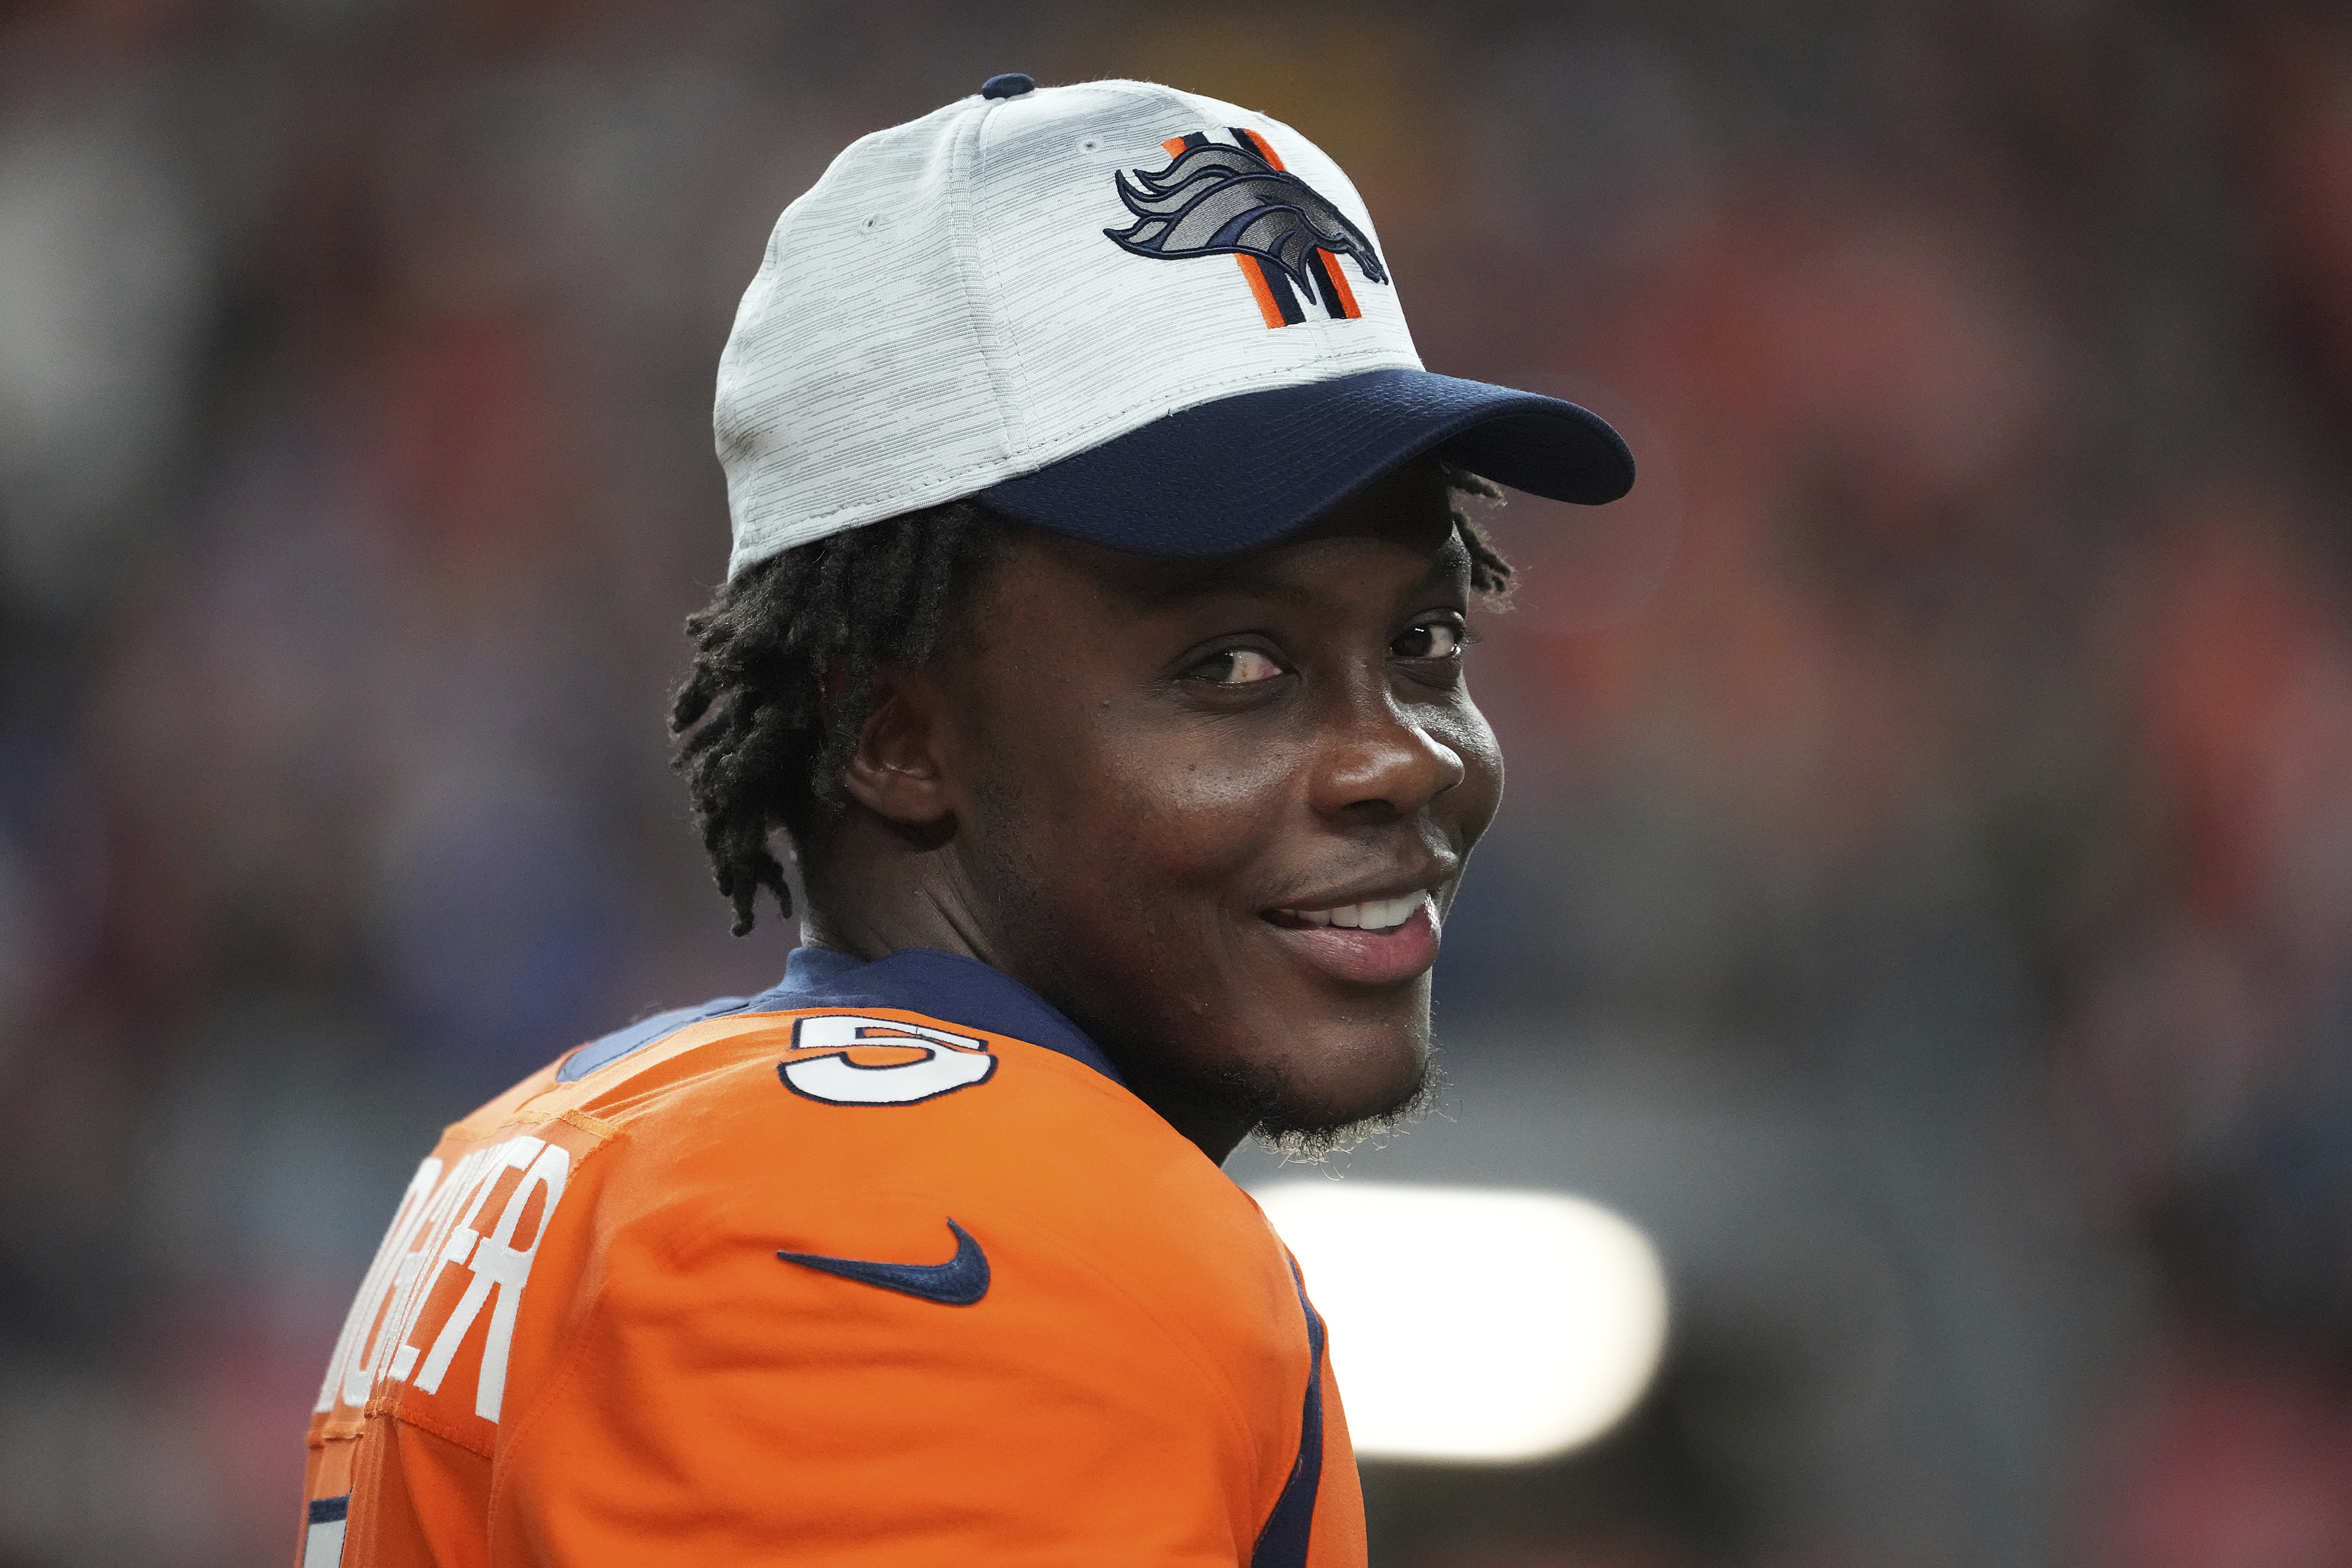 Broncos QB Teddy Bridgewater exits Chargers game with leg injury, is  replaced by Drew Lock